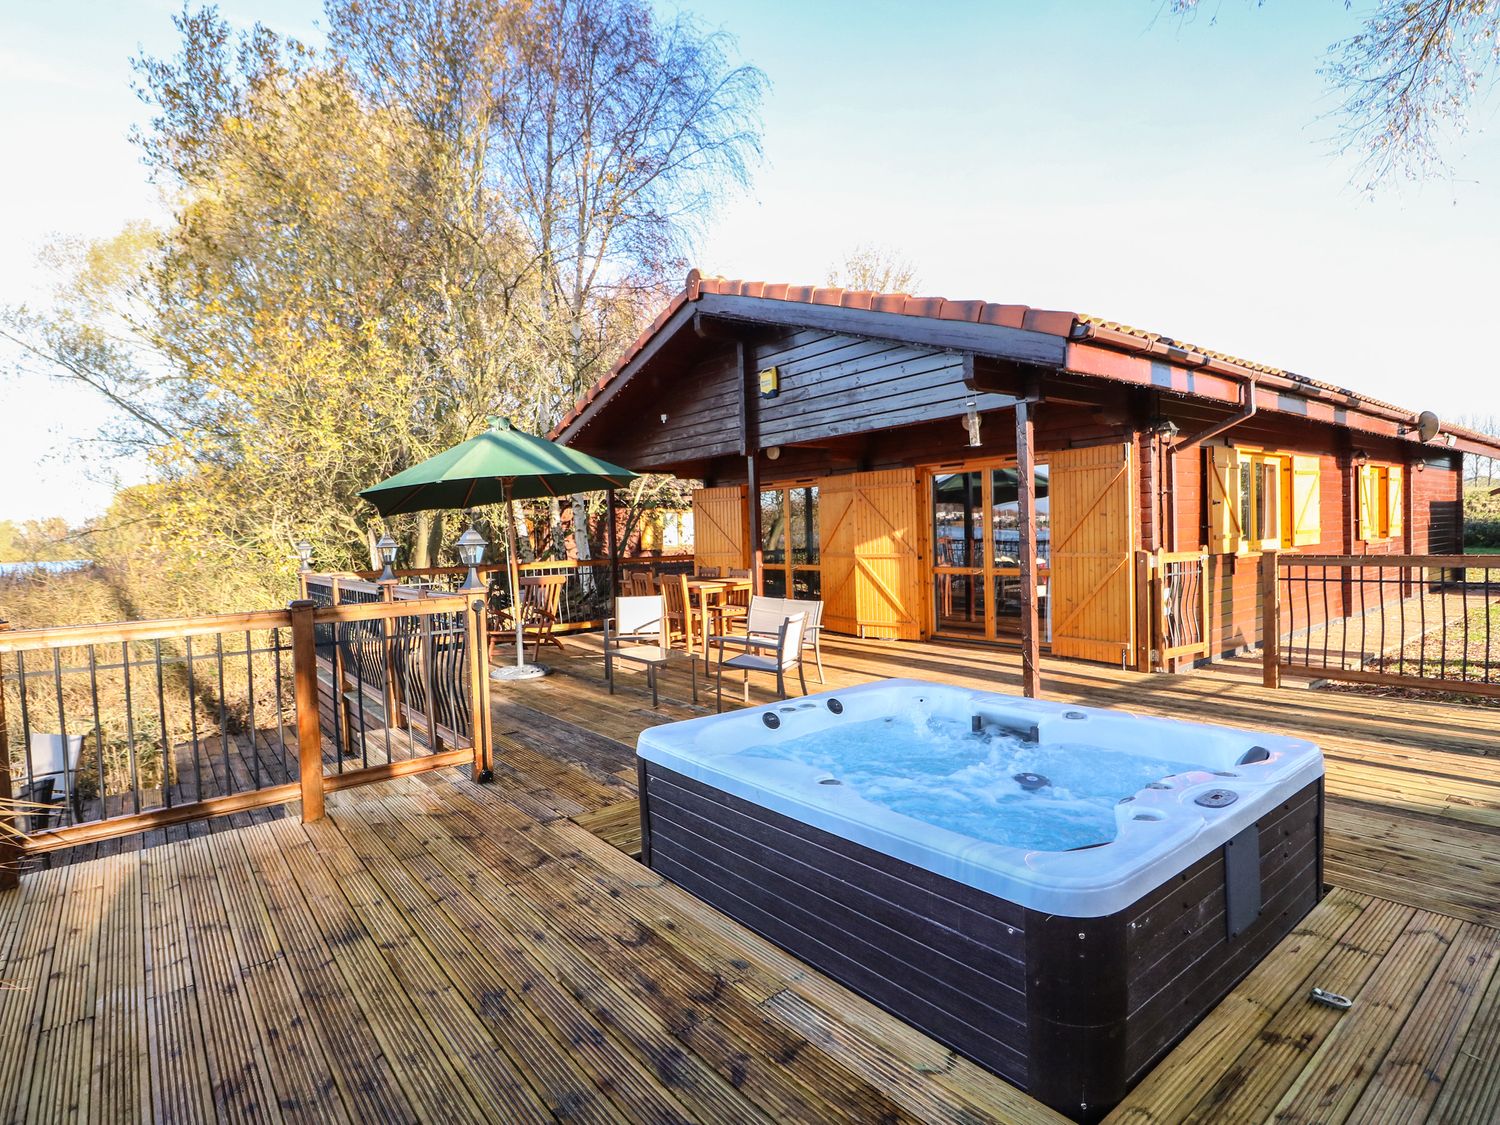 Osprey Lodge Tattershall Lakes Country Park Lincolnshire England Hot Tub Getaways Hot